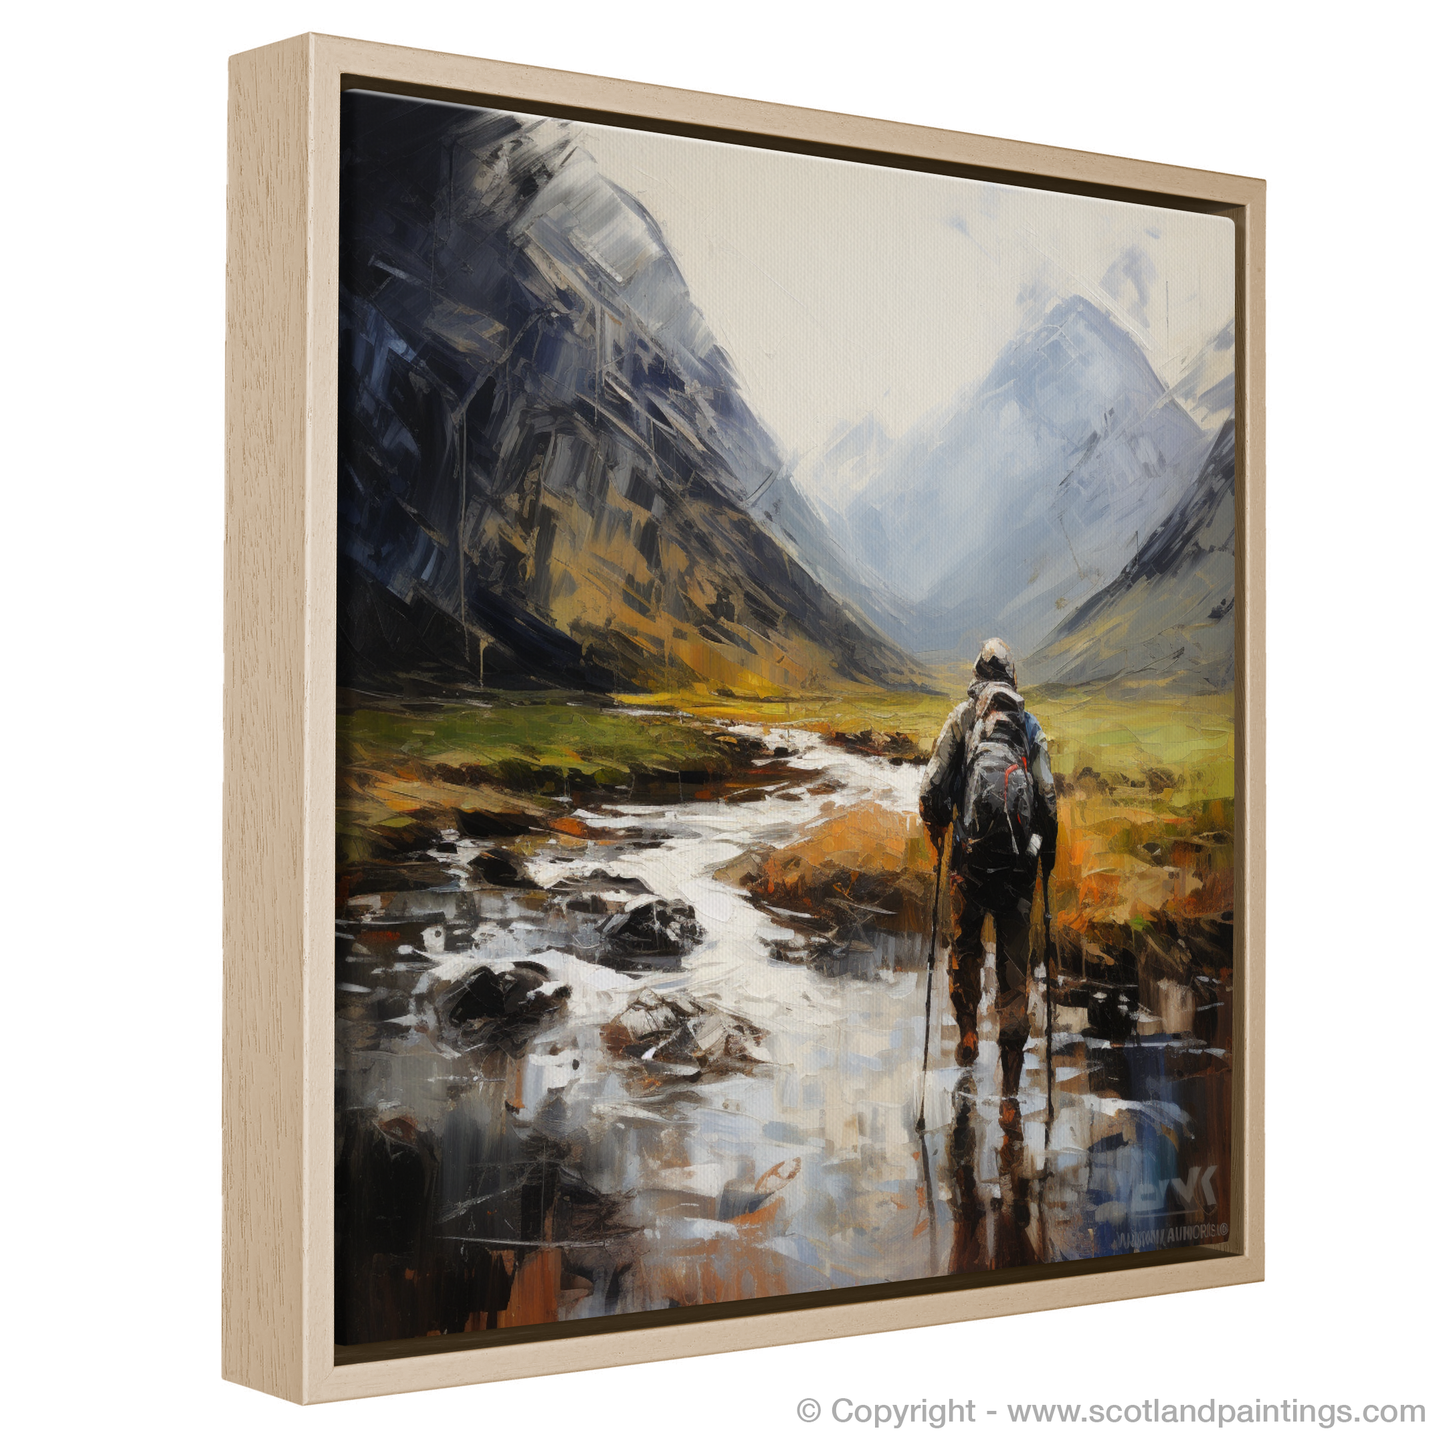 Painting and Art Print of Walker crossing River Coe in Glencoe entitled "Walker's Contemplation: An Expressionist Journey through Glencoe's Wild Terrain".